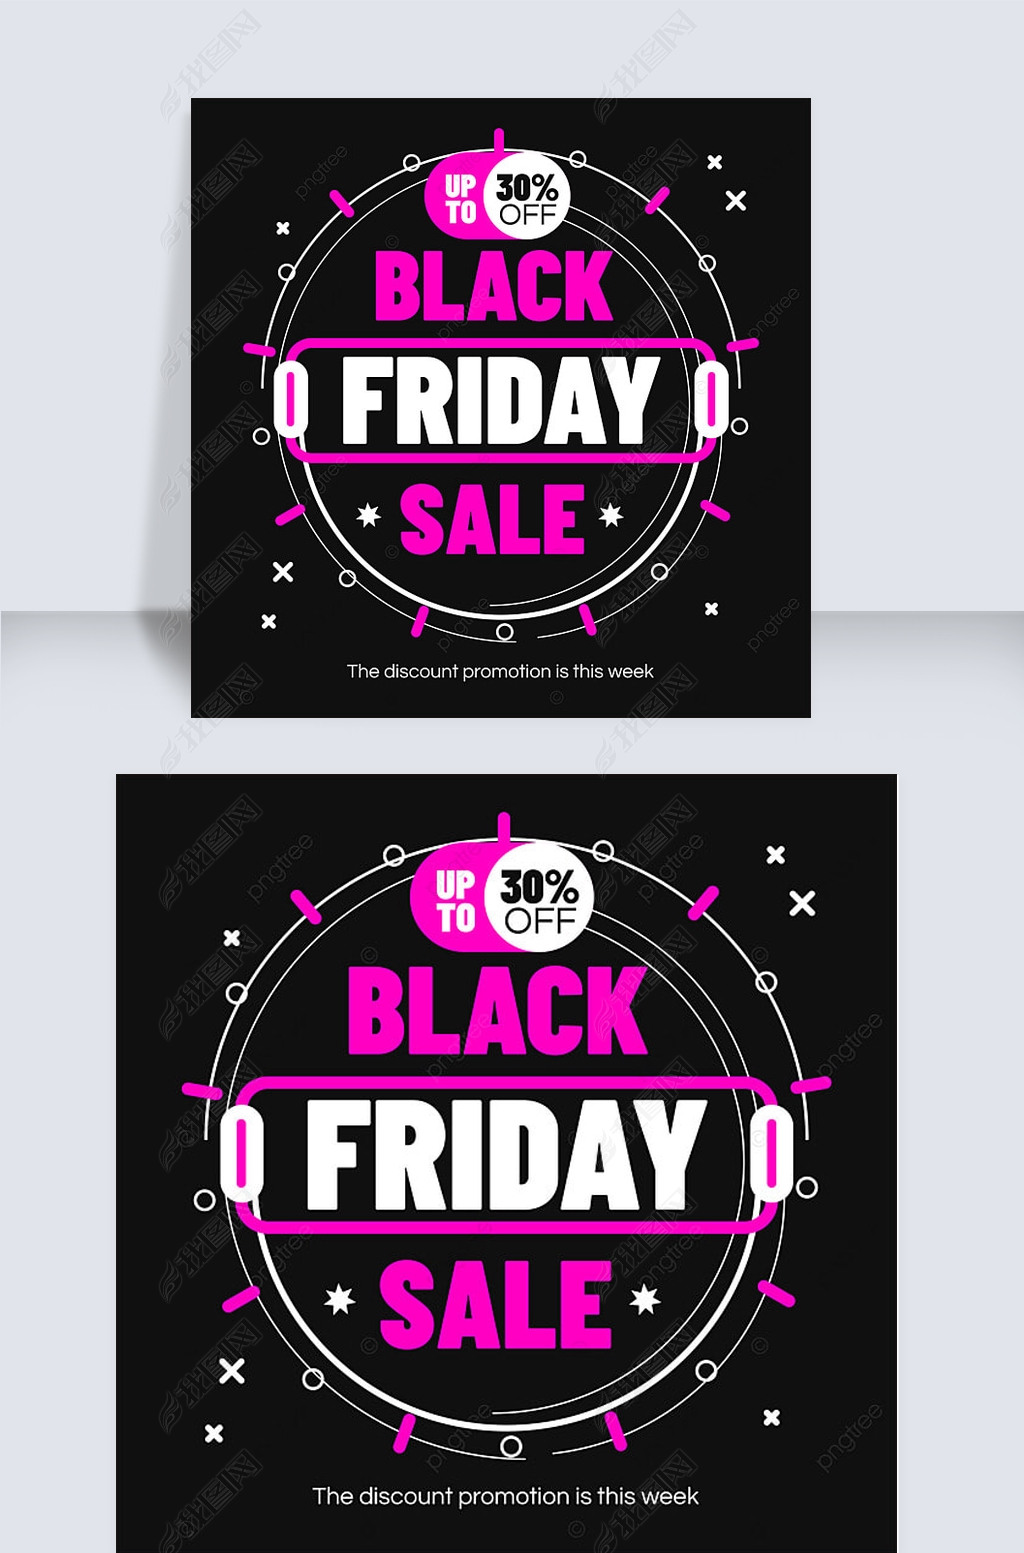 black friday limited time promotion advertisement